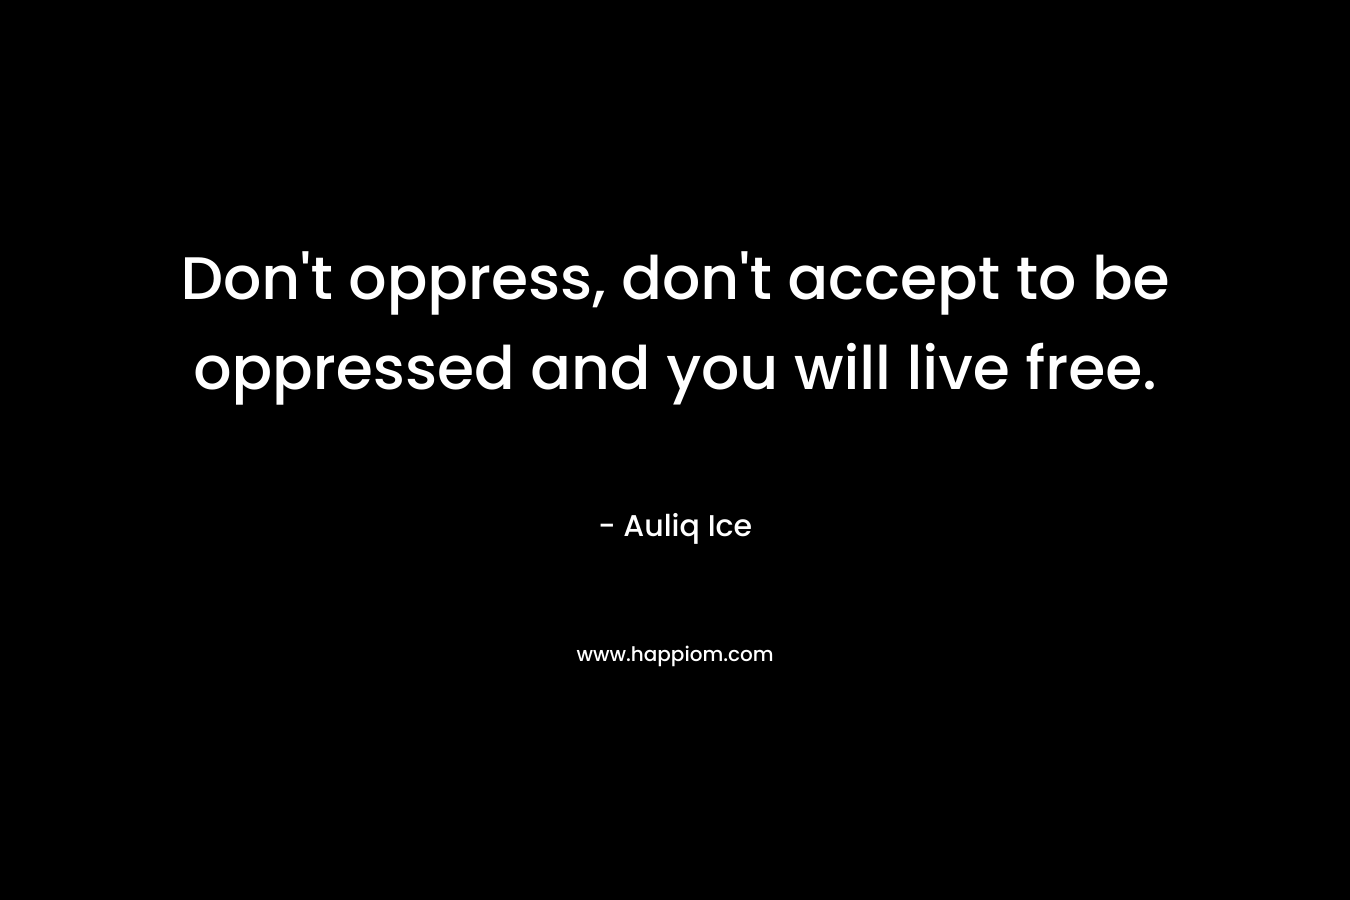 Don't oppress, don't accept to be oppressed and you will live free.